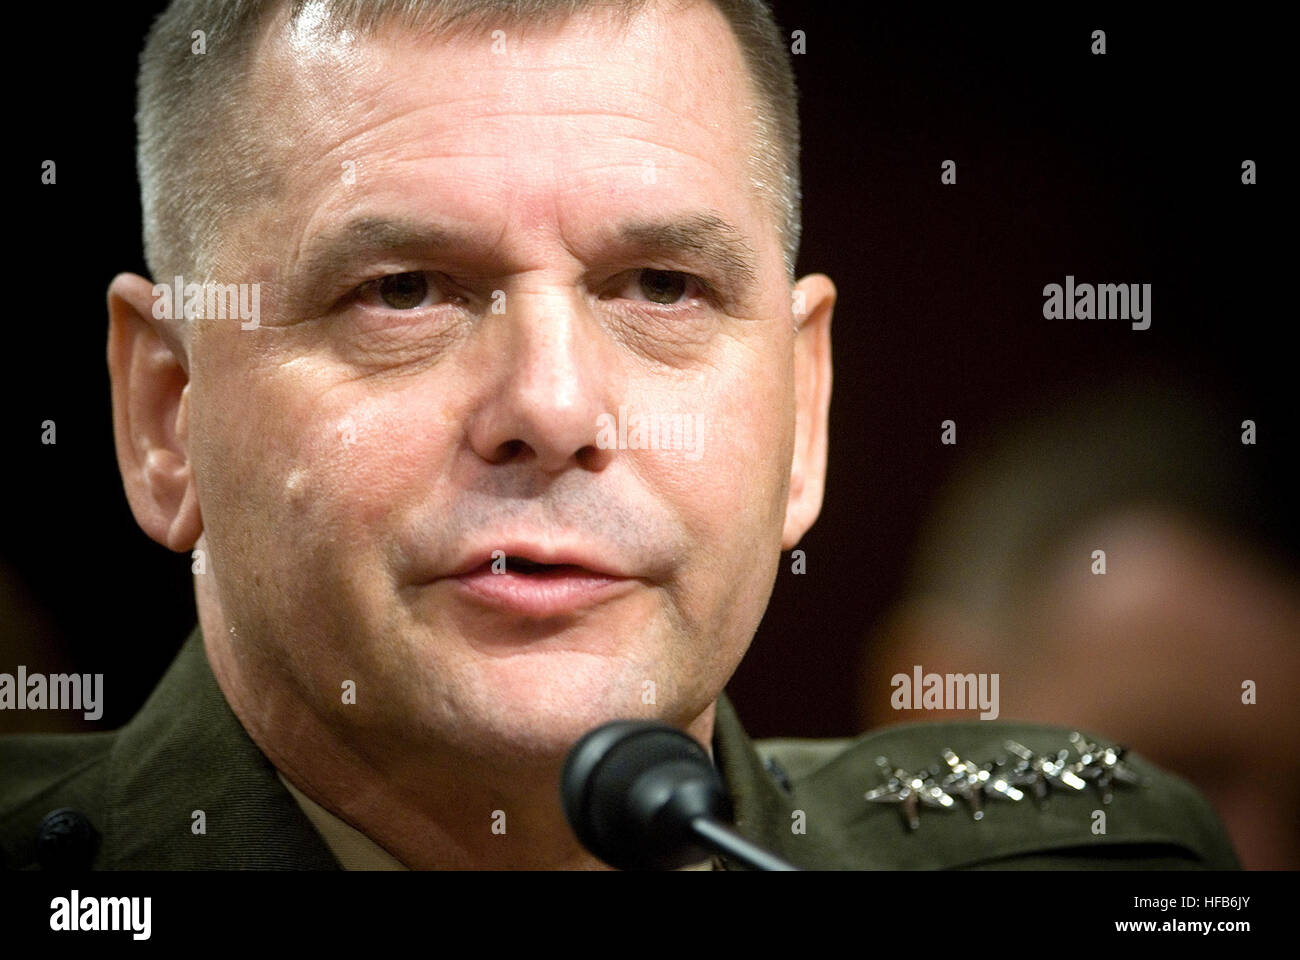 070731-N-0696M-256 WASHINGTON, D.C. (July 31, 2007) - Commander, U.S. Strategic Command, Gen. James E. Cartwright, testifies during his confirmation hearing in front of the Senate Armed Services Committee for appointment to Vice-Chairman of the Joint Chiefs of Staff at Hart Senate Office Building, July 31, 2007. Cartwright was joined by Chief of Naval Operations, Adm. Mike Mullen in testimony to his appointment to Chairman, Joint Chiefs of Staff. DoD photo by Mass Communication Specialist 1st Class Chad J. McNeeley (RELEASED) Defense.gov photo essay 070731-N-0696M-256 Stock Photo